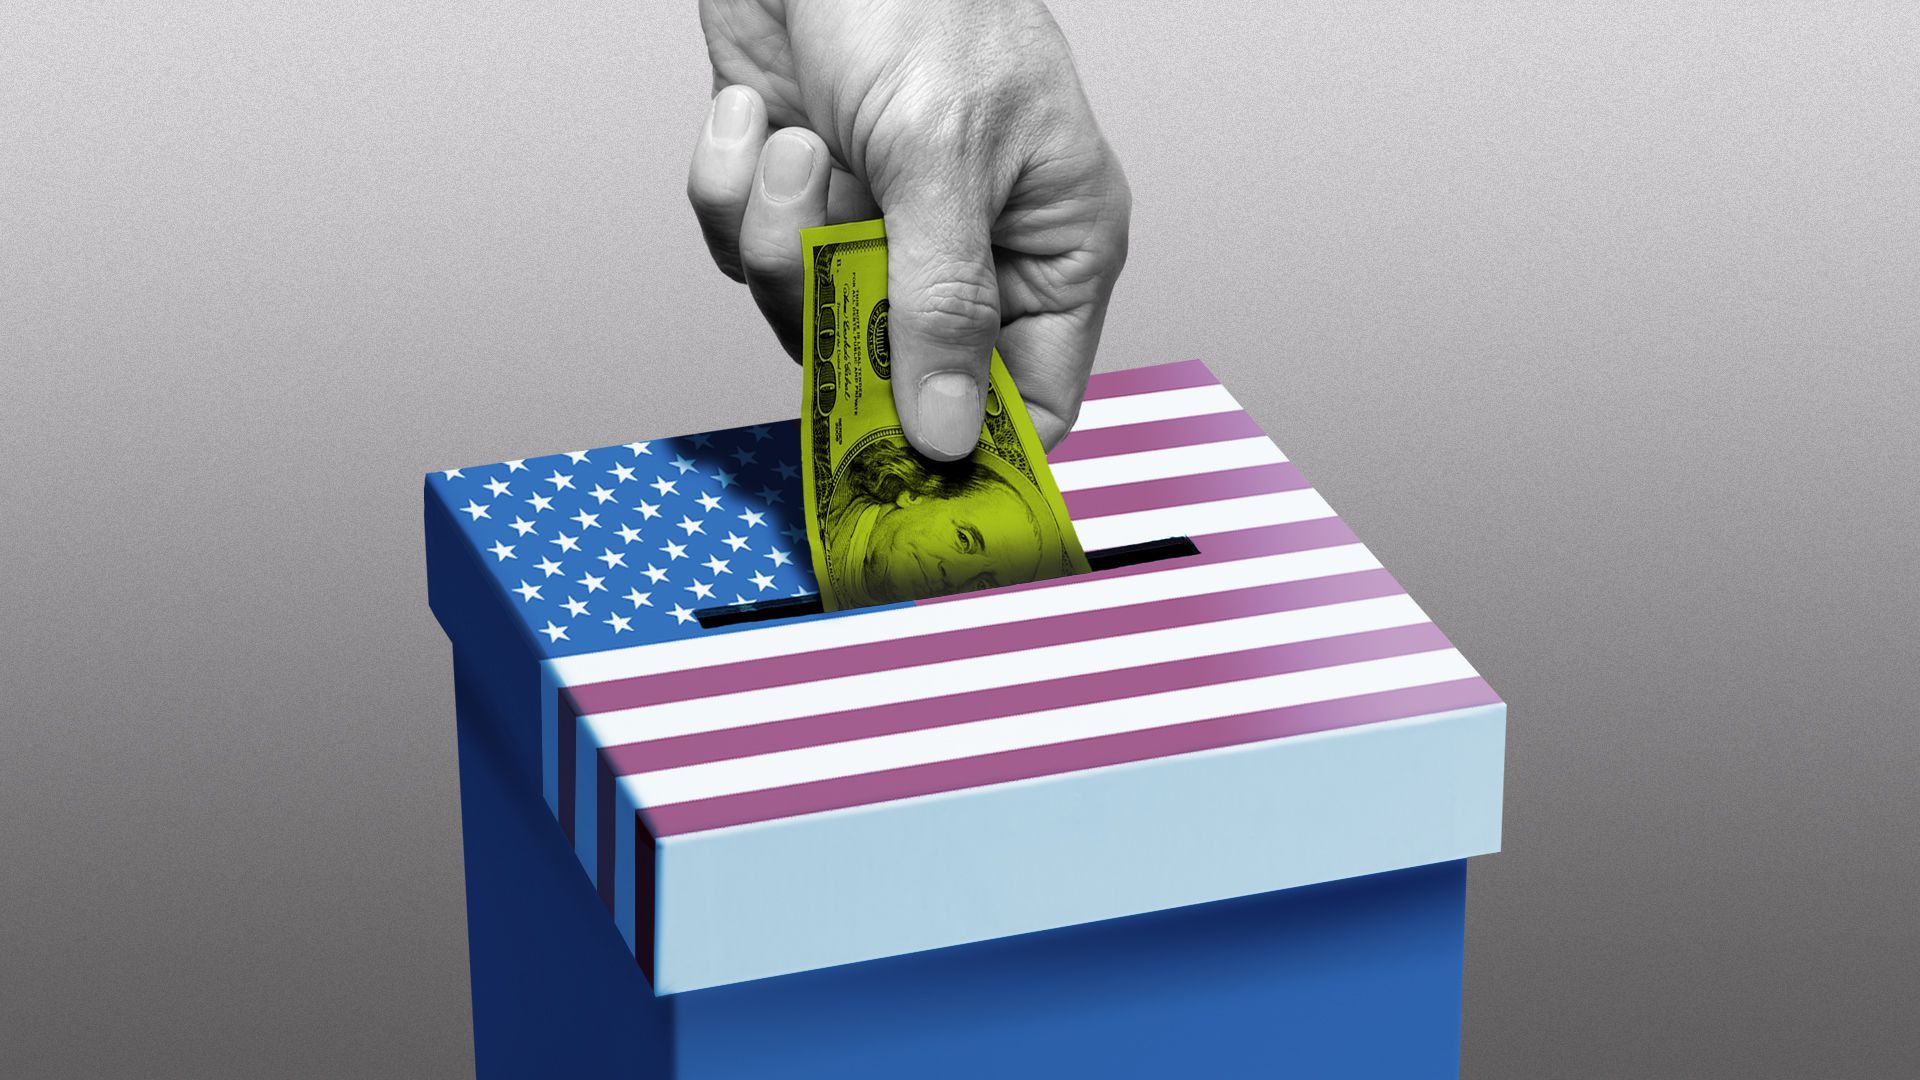 Illustration of a hand putting a hundred dollar bill in an American-flag ballot box